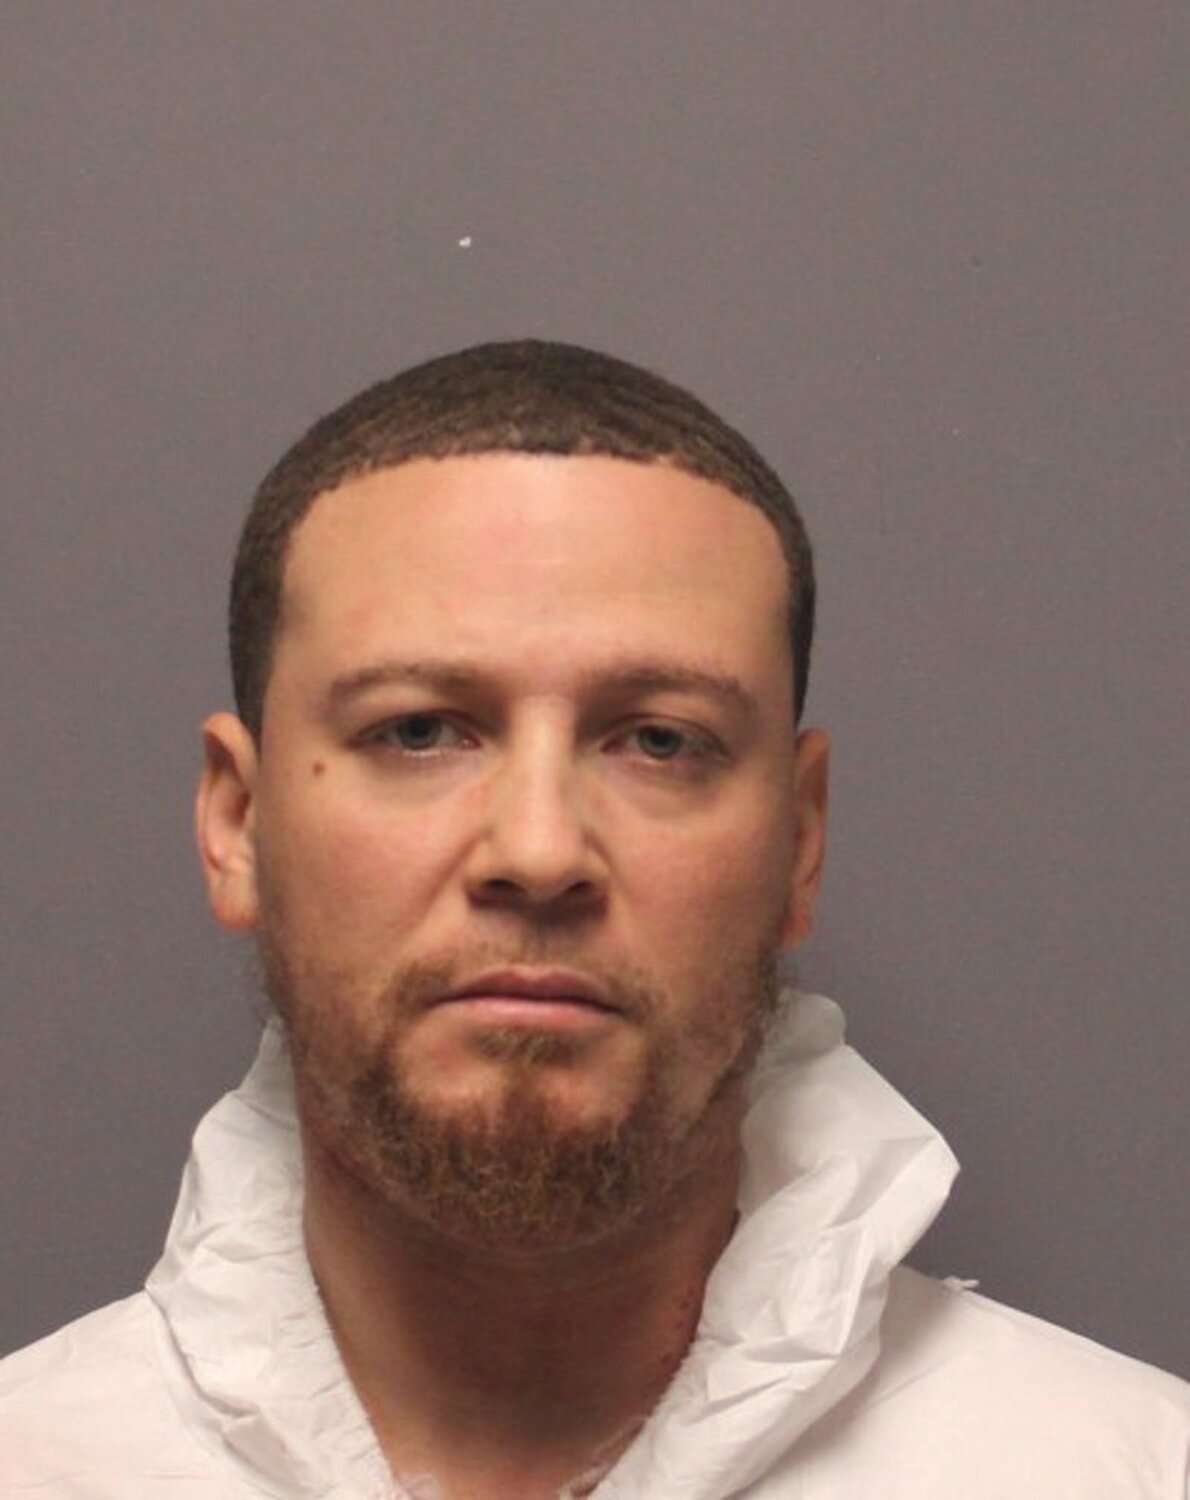 CHARGED: Michael A. Jones, 33, of 25 Queen St., Cranston, was arrested and charged following the “accidental” shooting of his four-year-old son on Halloween morning.